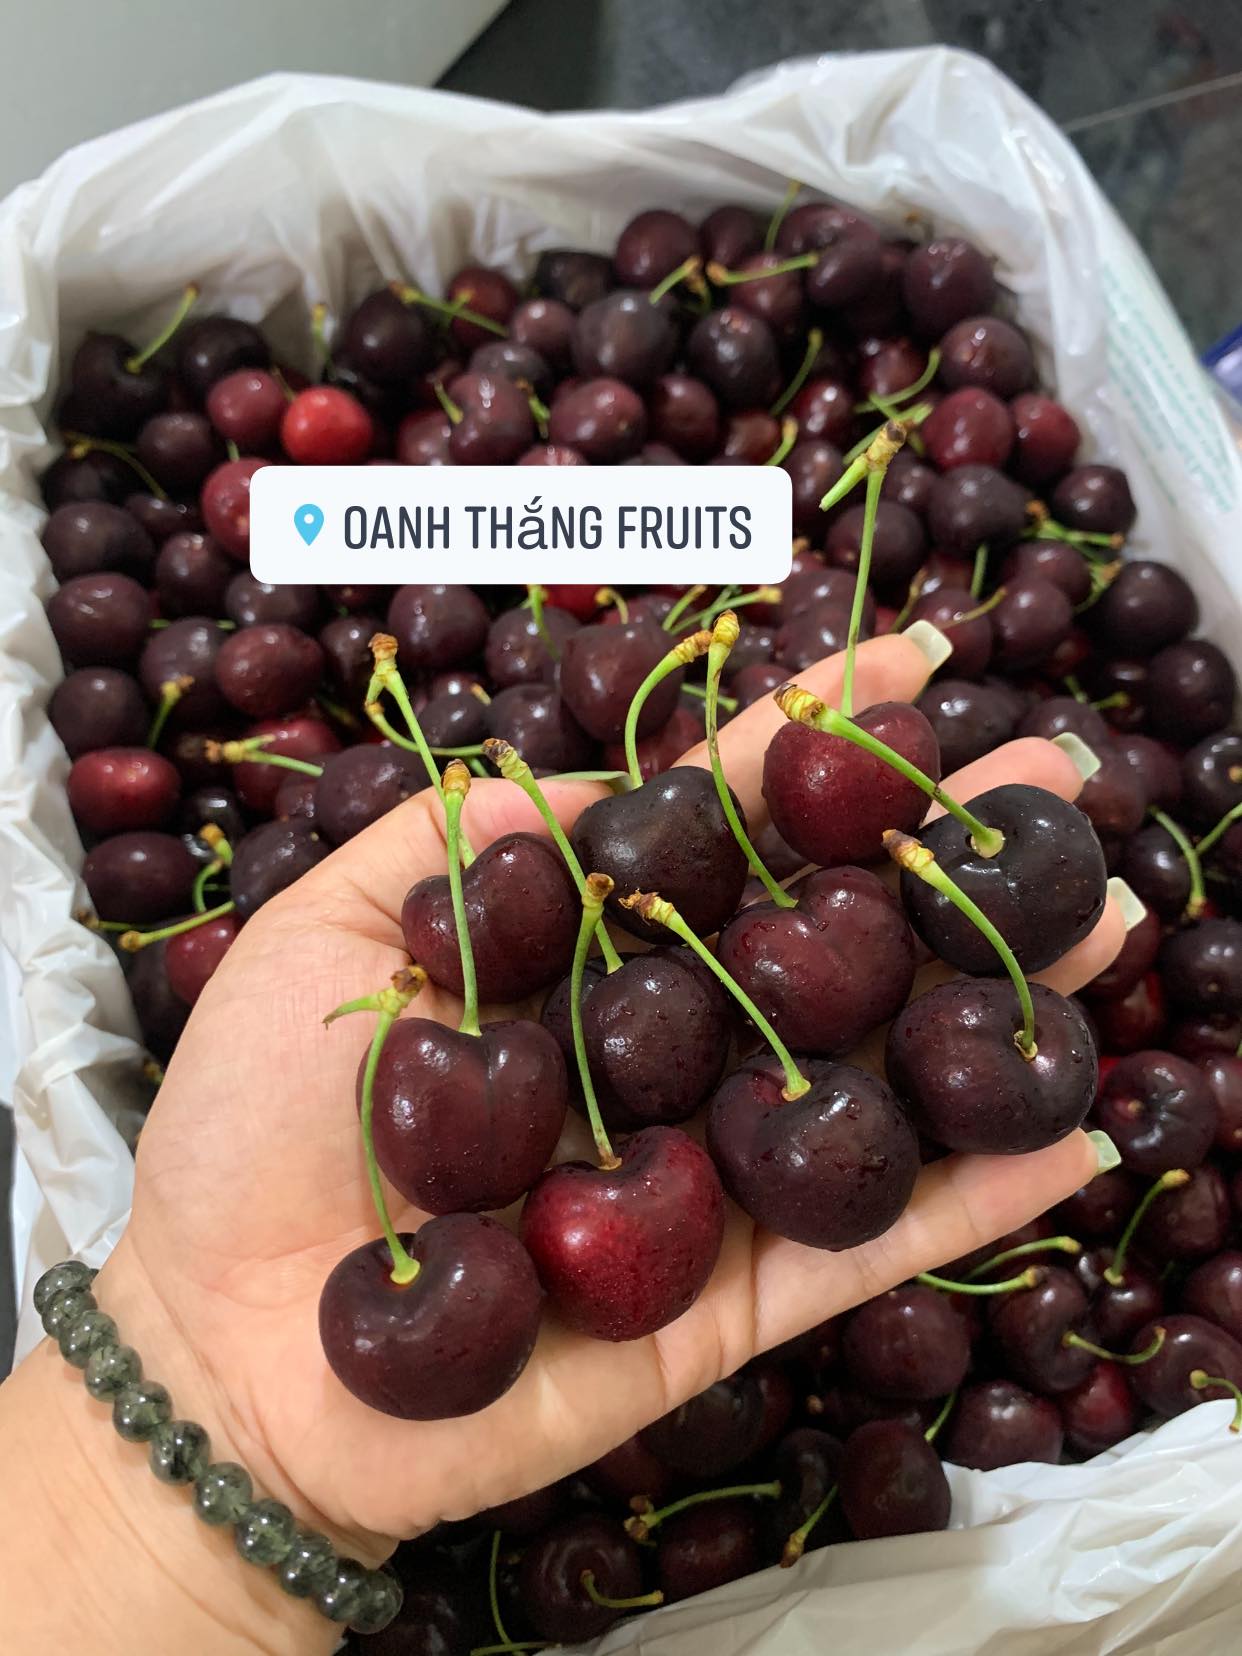 Oanh Thắng Fruits